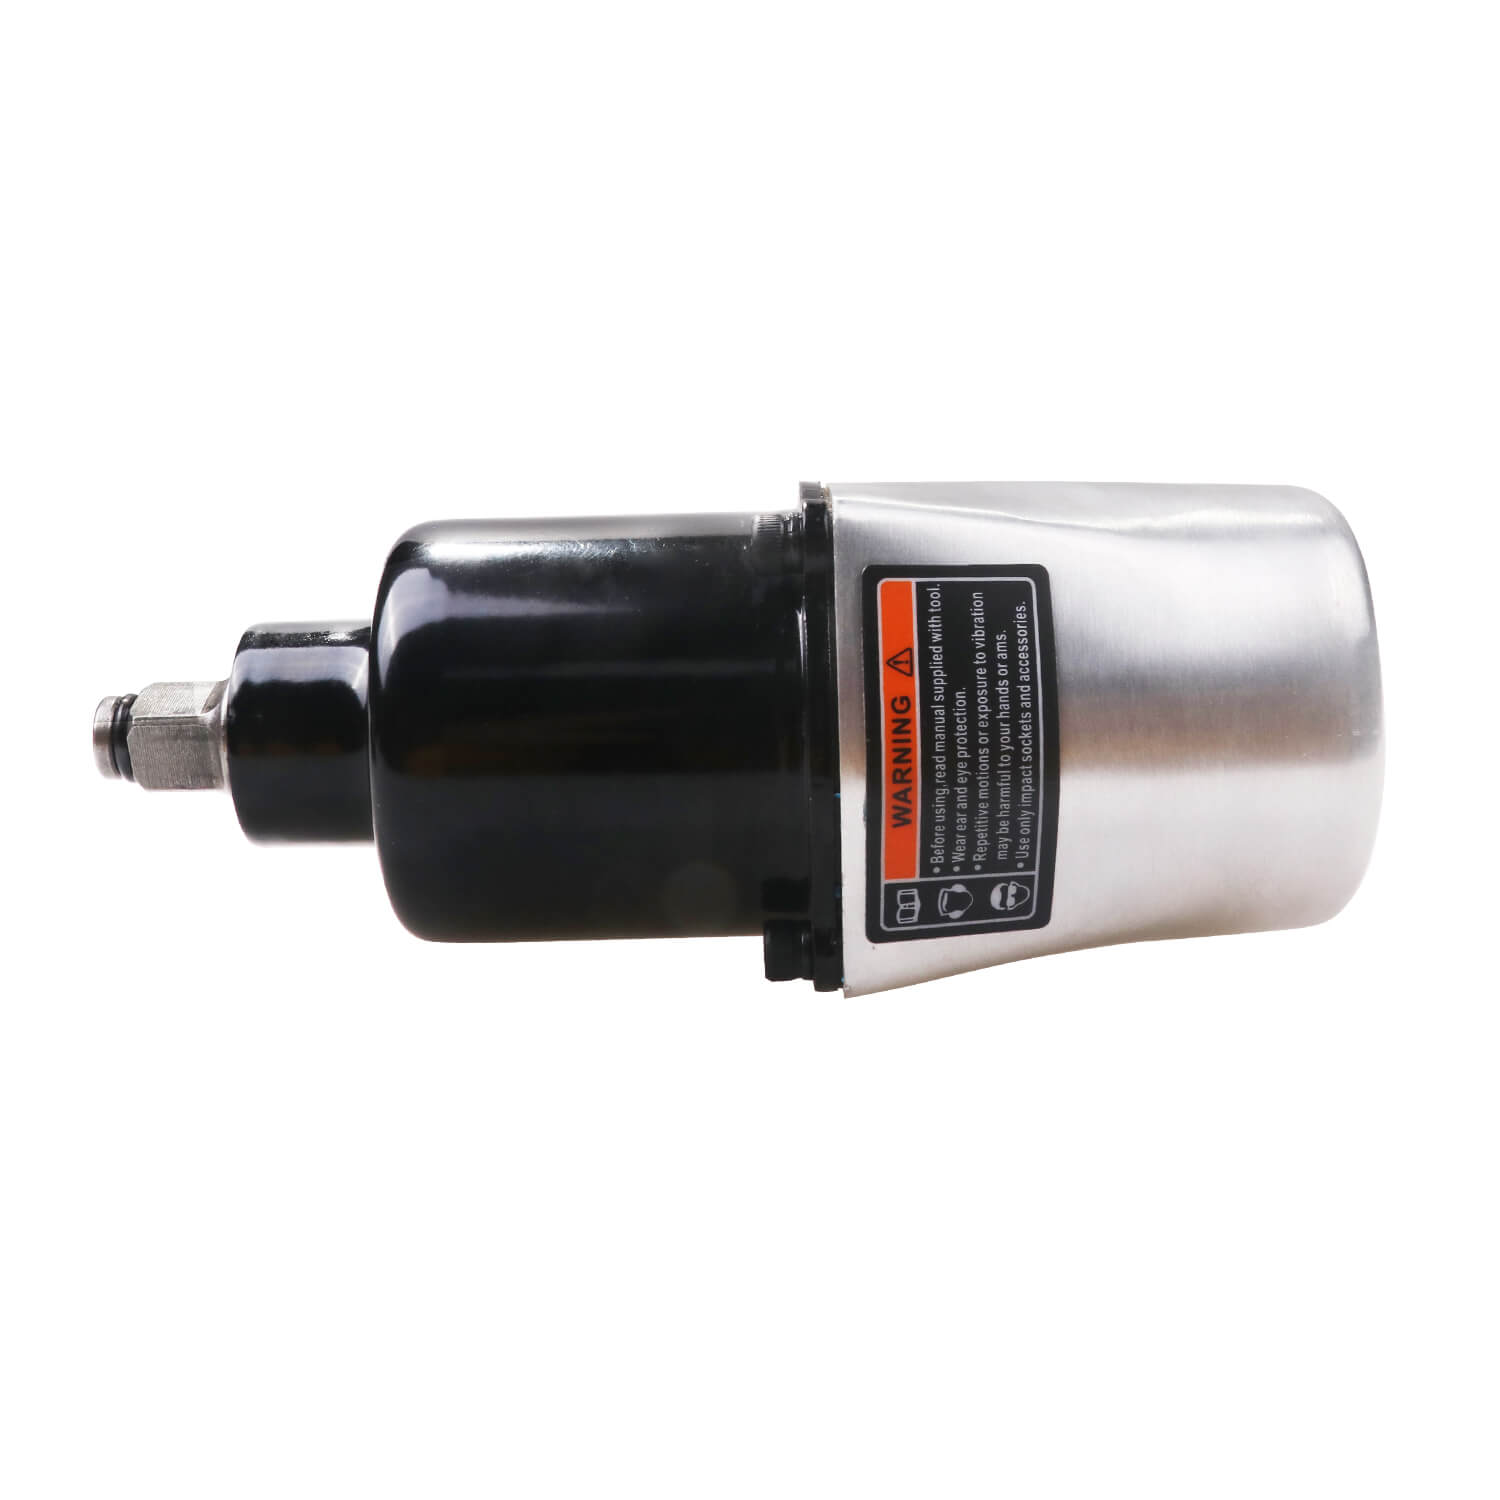 air impact wrench details